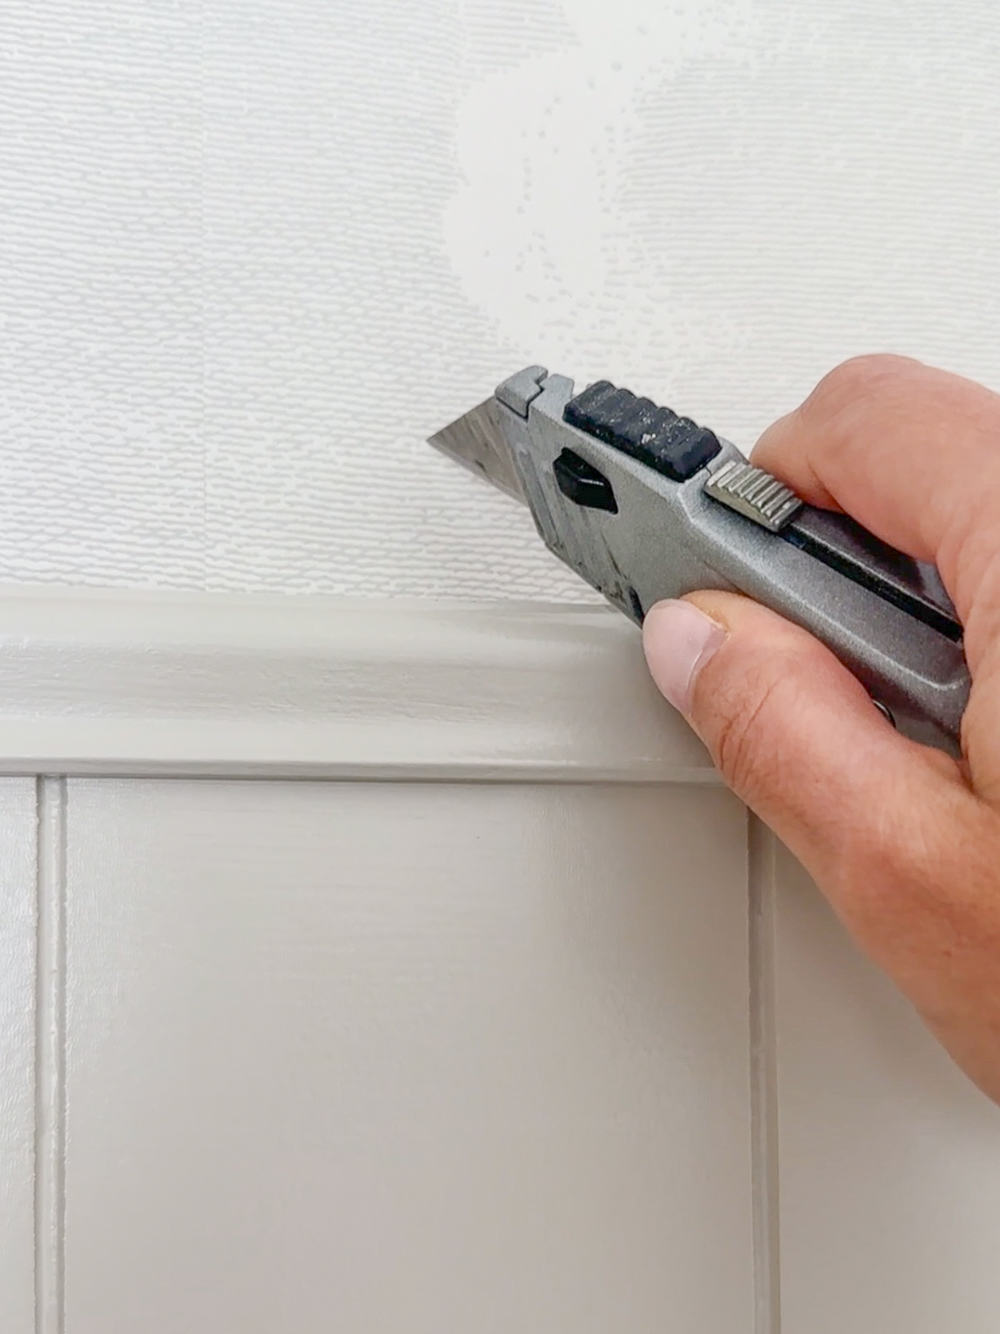 person using a utility knife to score a flap in wallpaper in order to hide the hole they are about to make